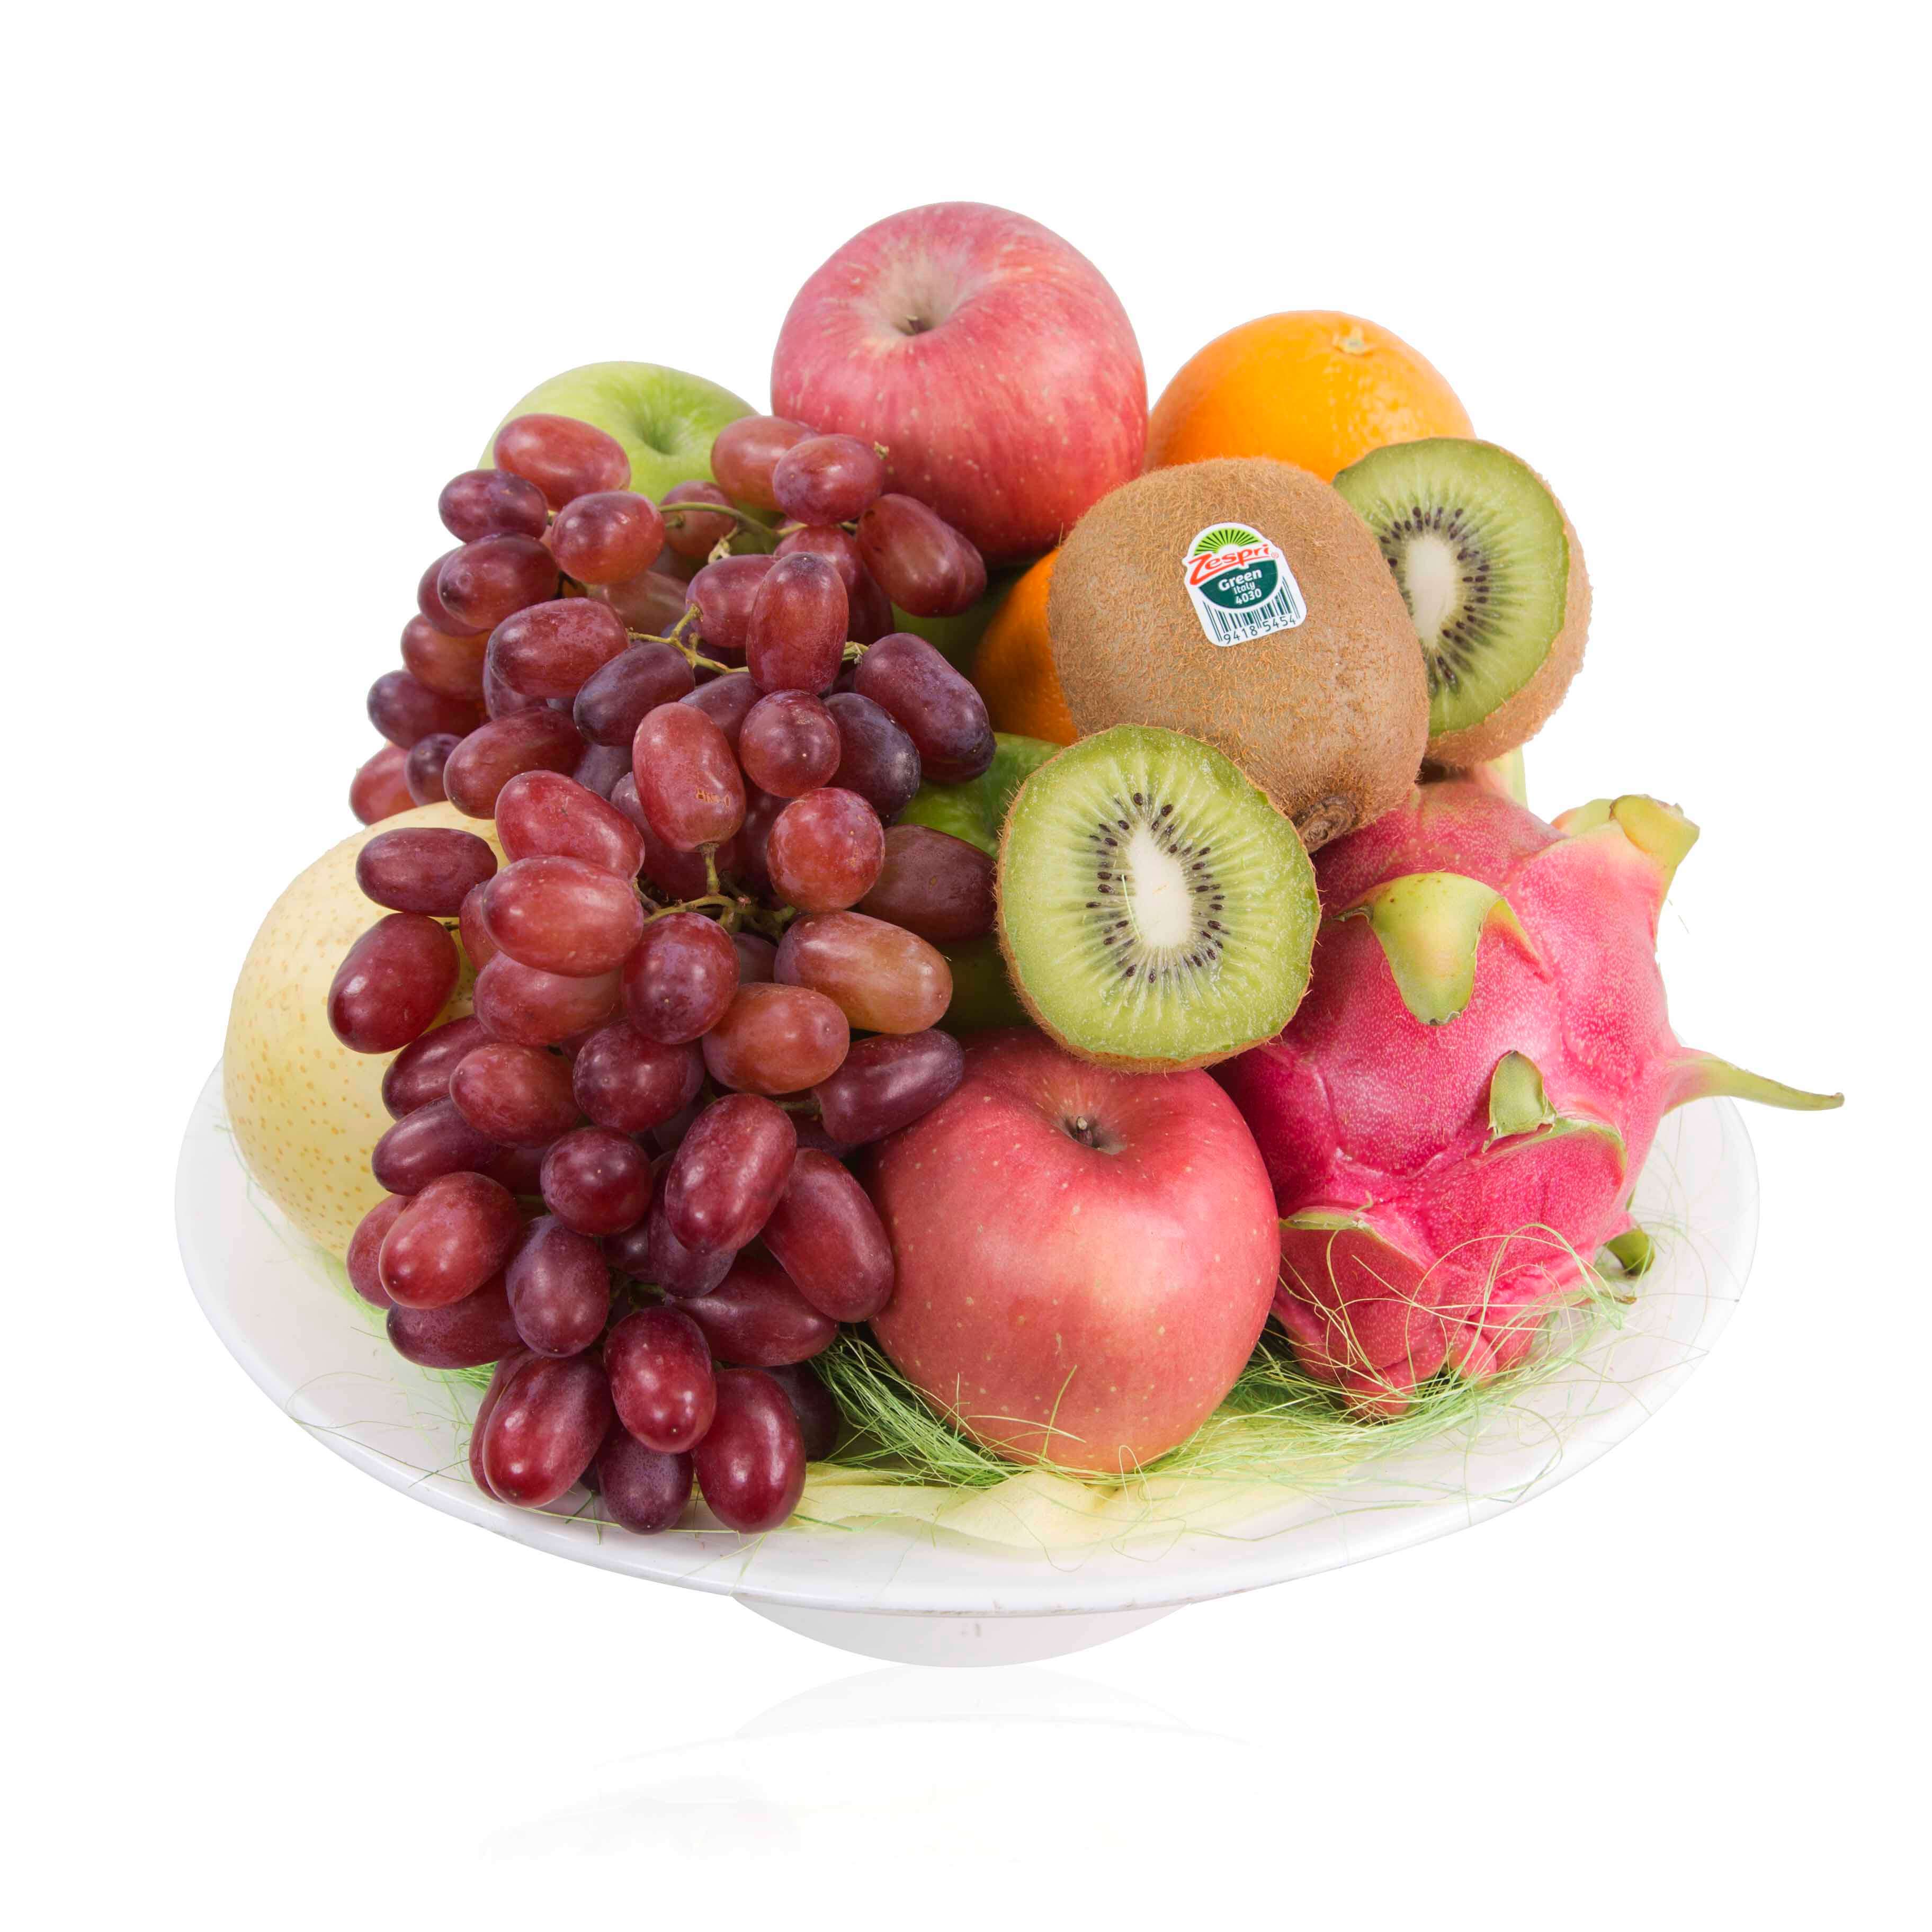 When and Why Should You Gift a Fruit Hamper to Your Loved Ones?